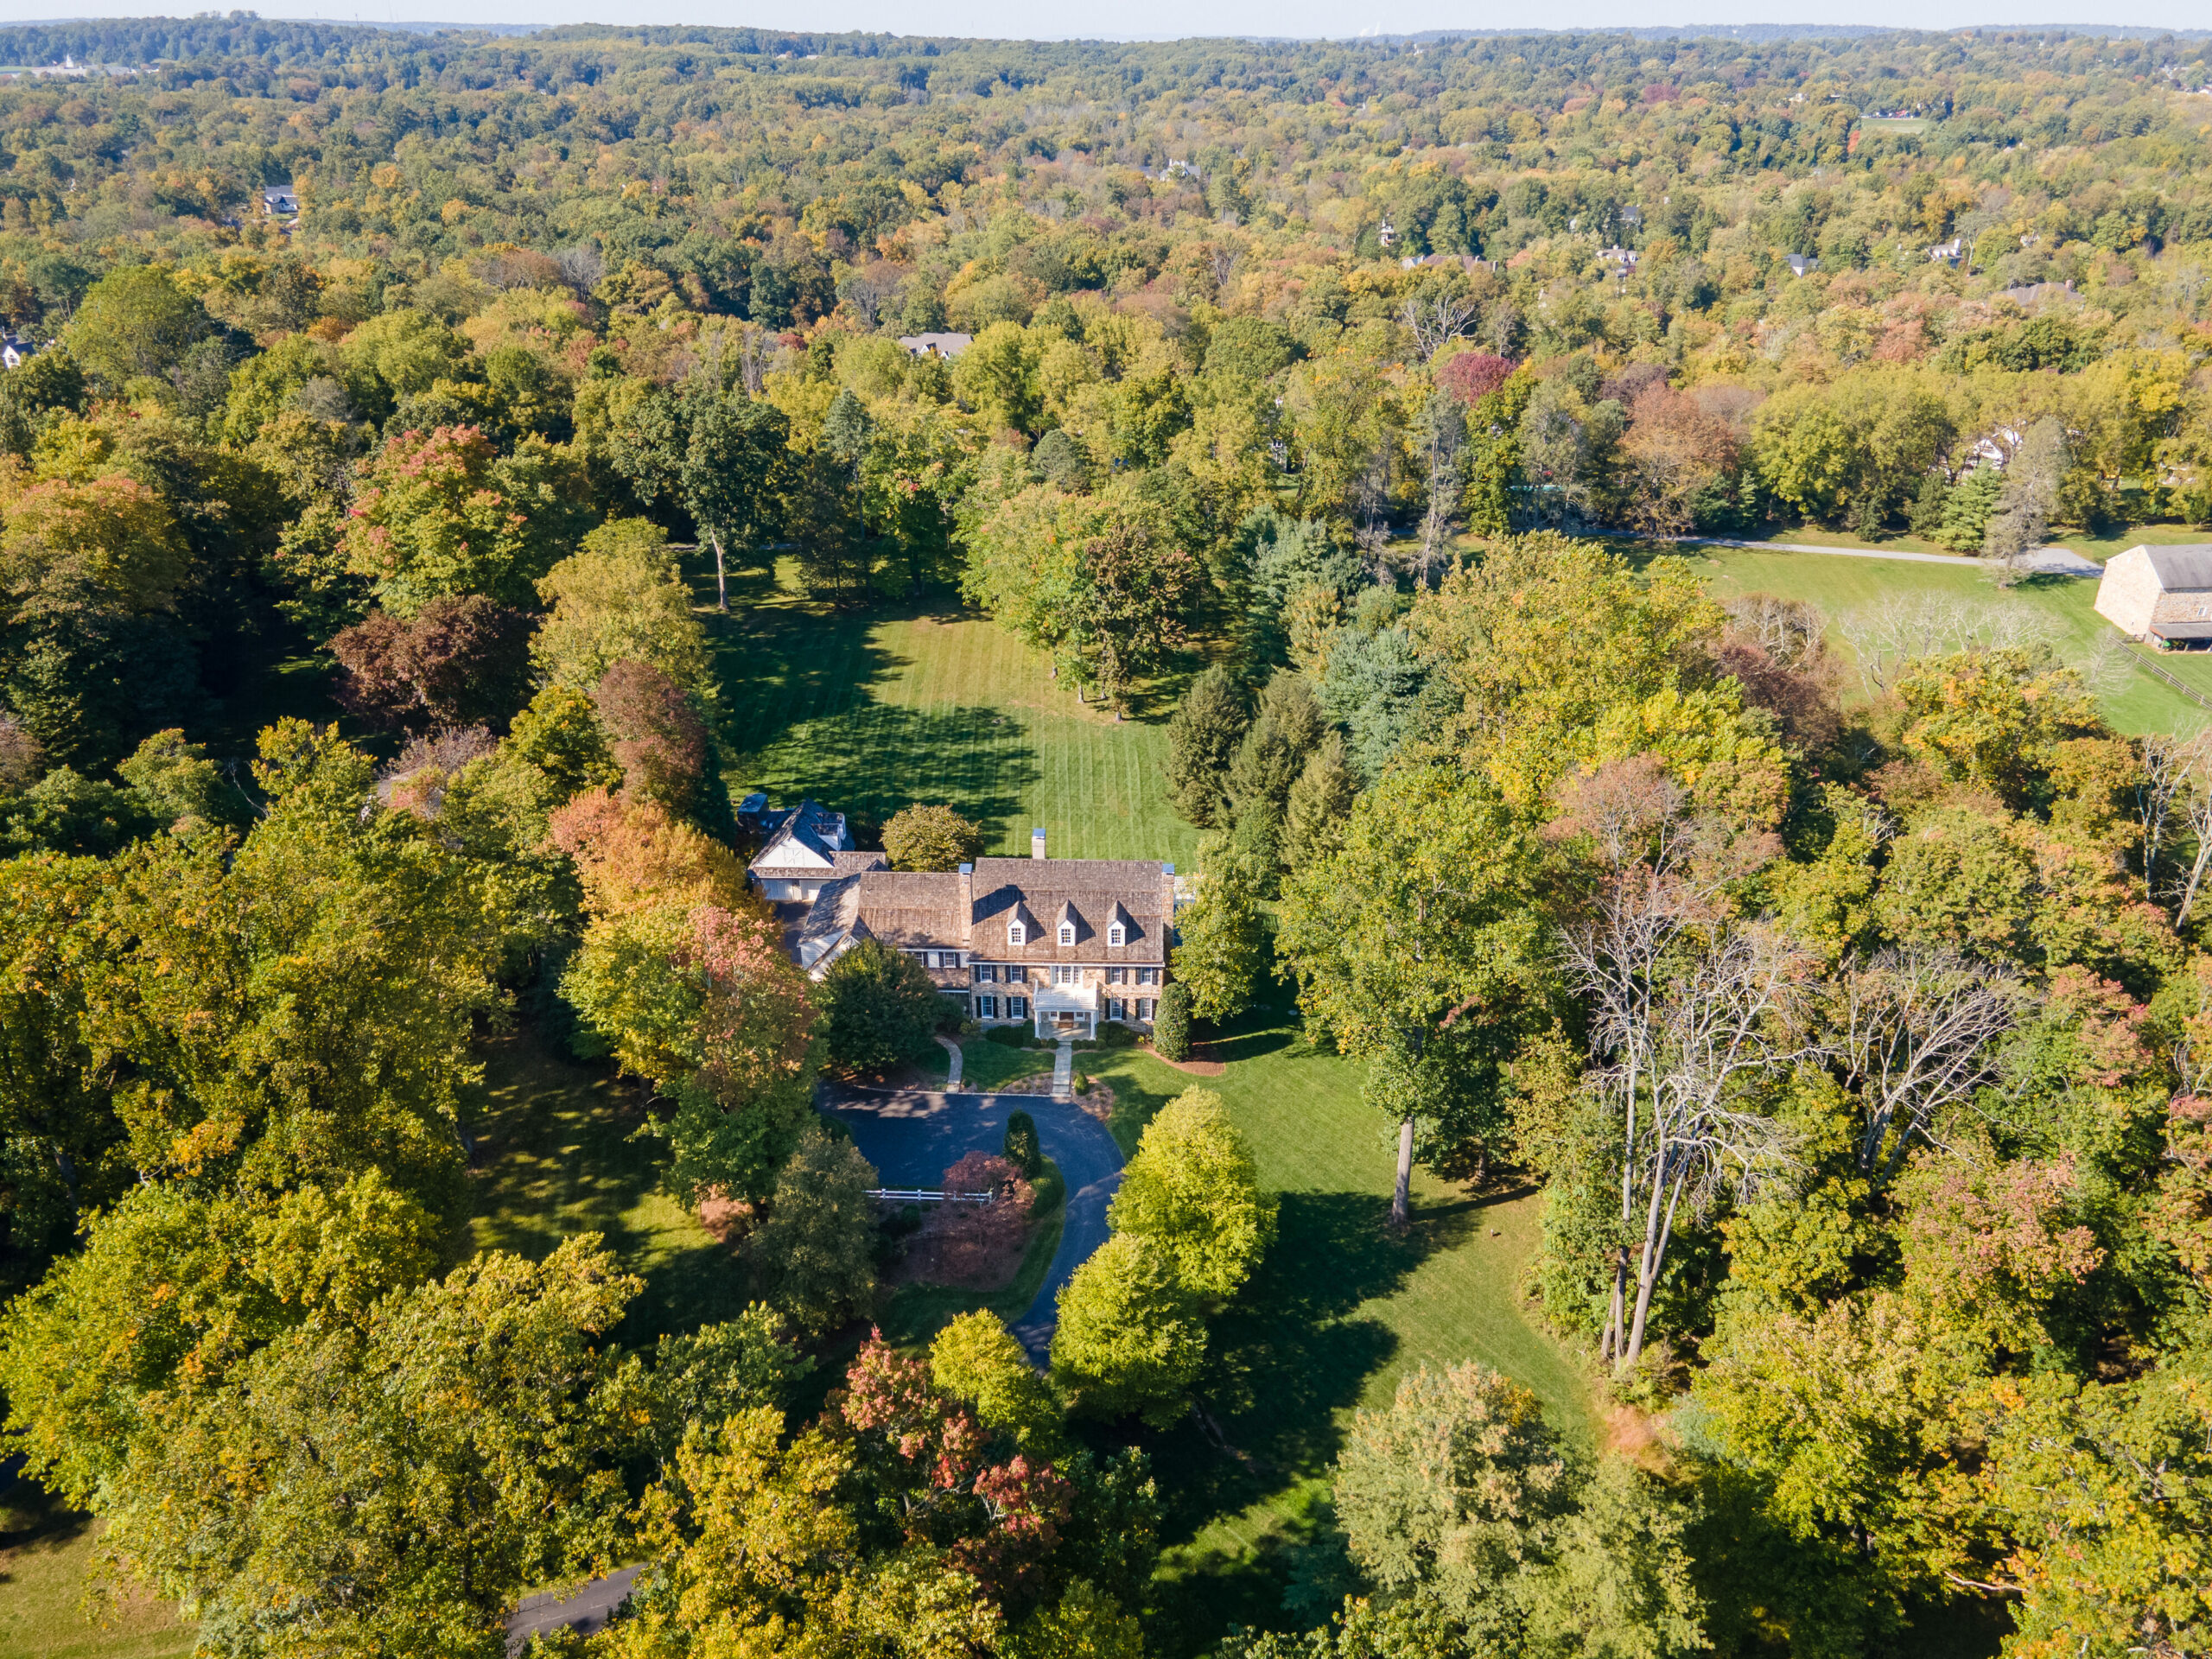 aerial view of the home and surrounding trees